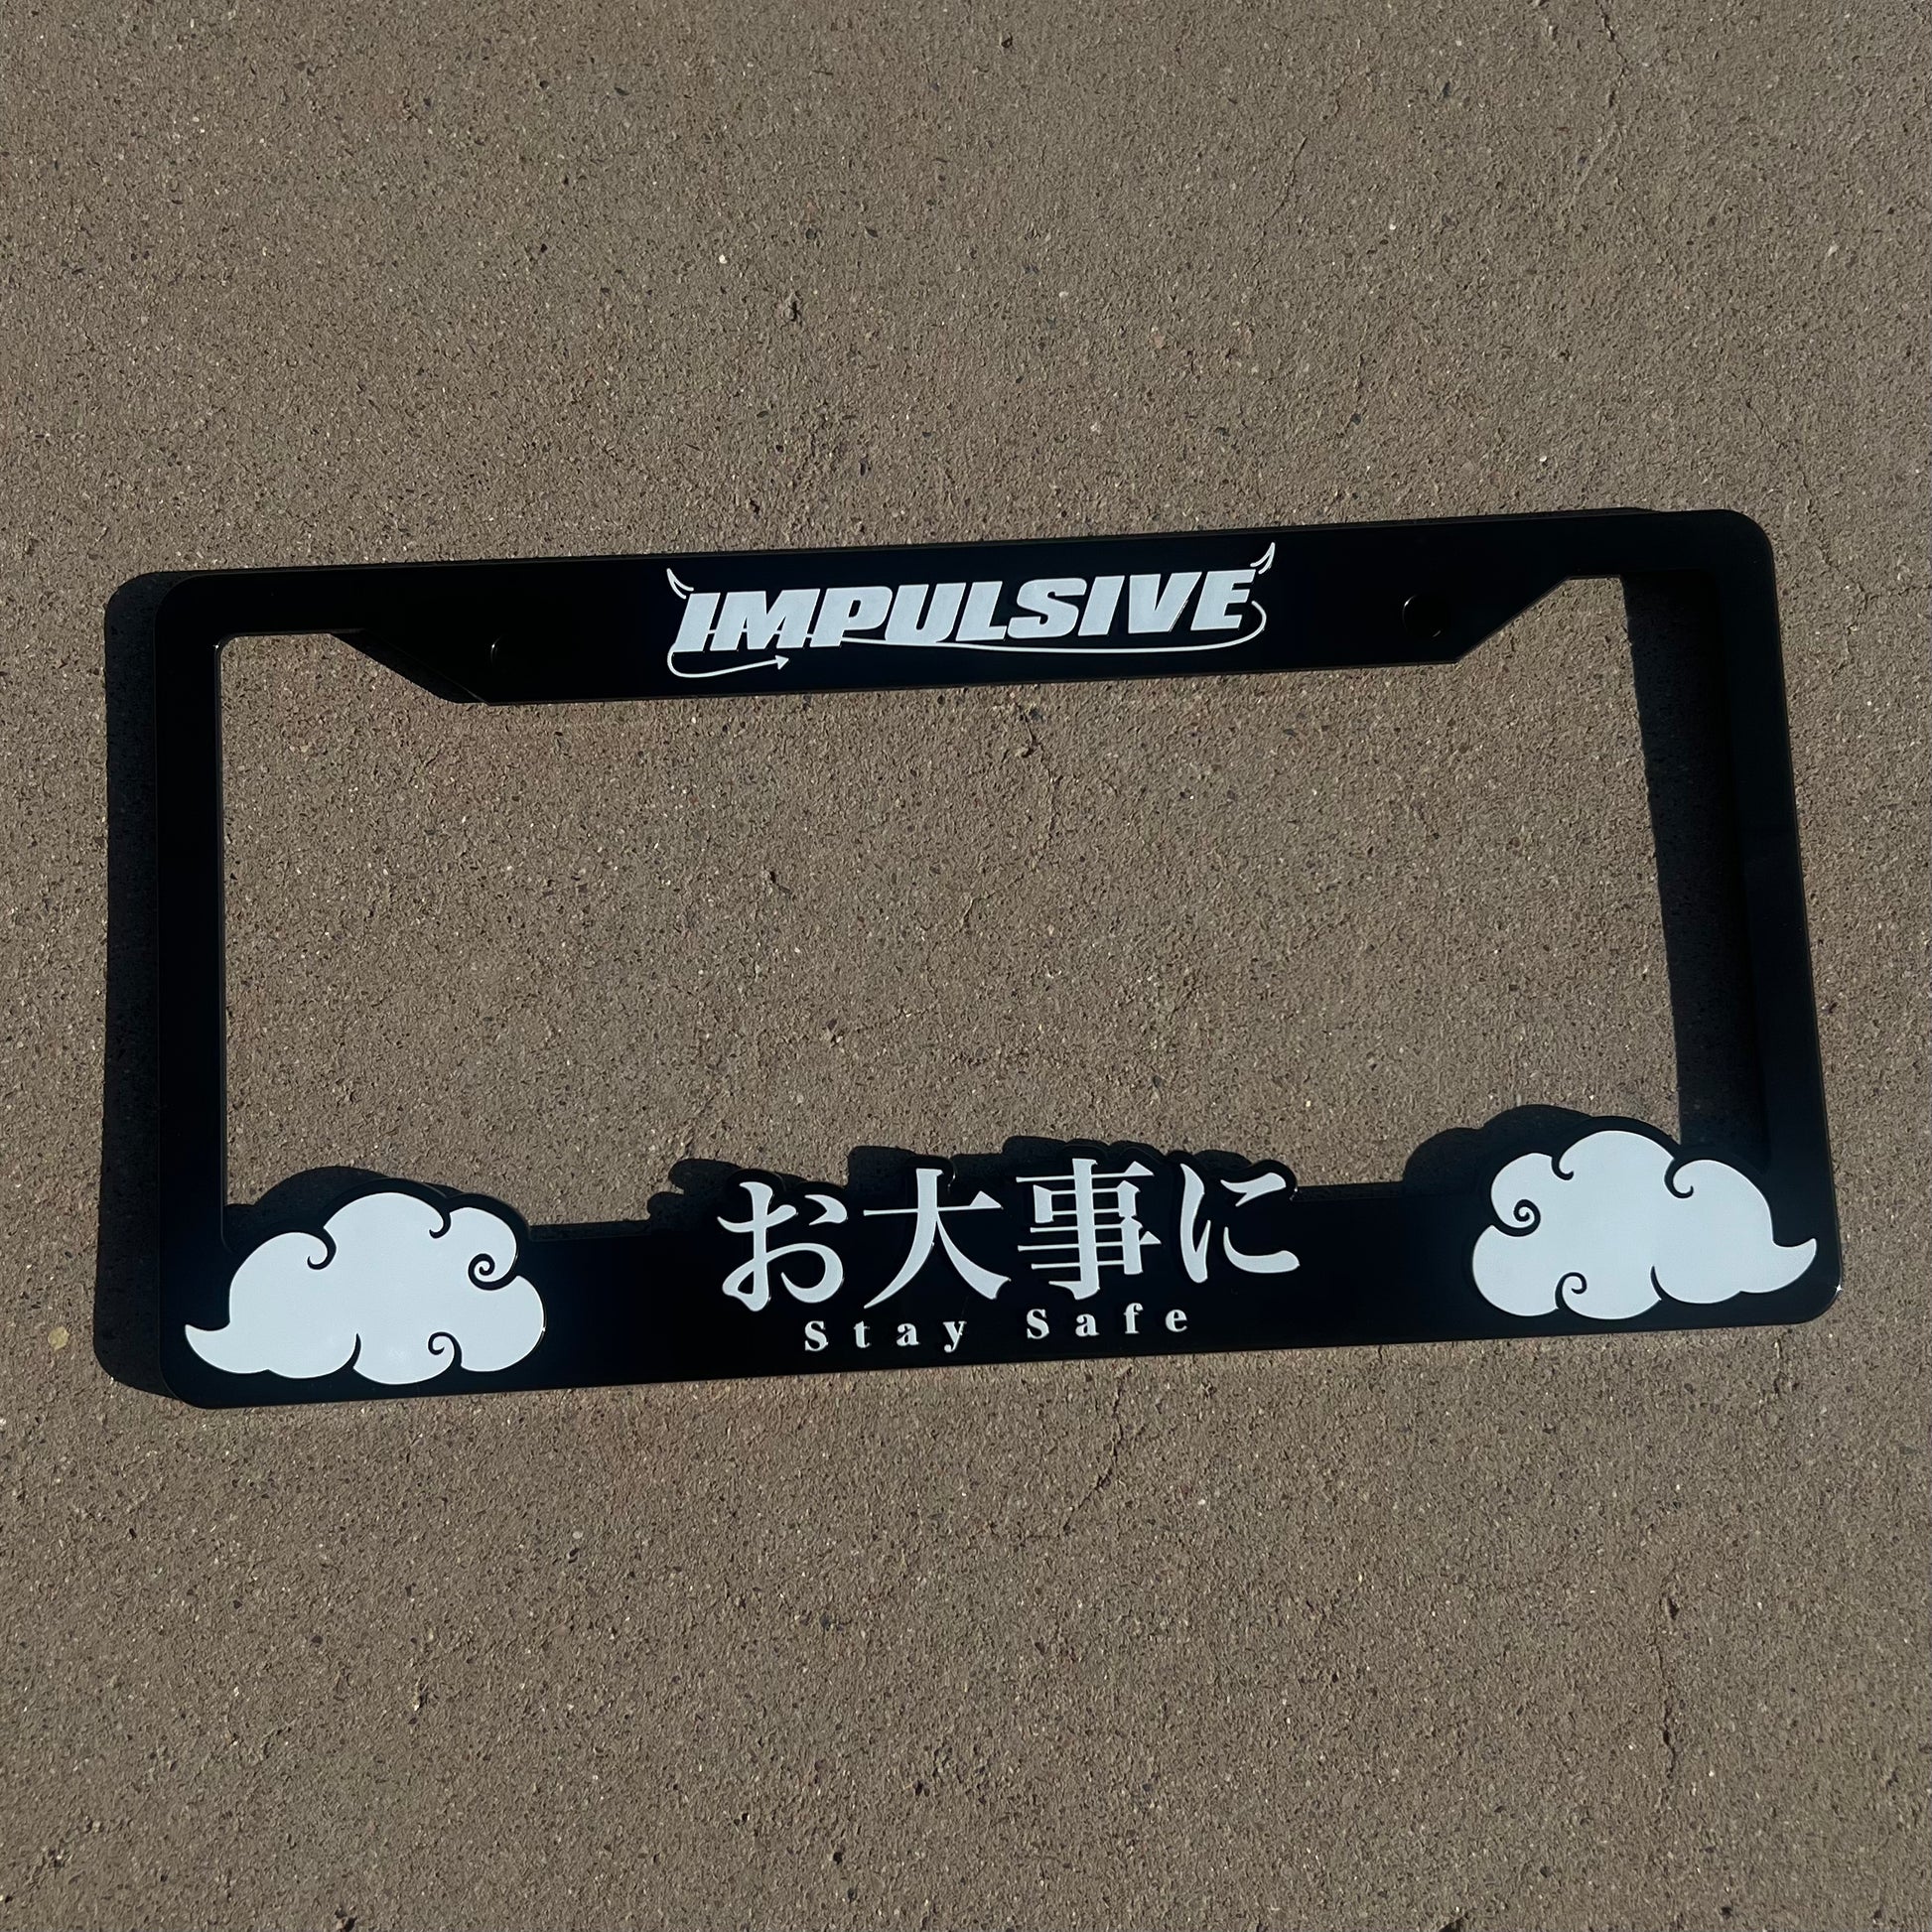 Multiple Japanese anime inspired plastic custom License Plate Frame. Top has Impulsive logo and the bottom has japanese characters and english translated to stay safe surrounding with japanese clouds. Asian inspired. Black Frame with White lettering